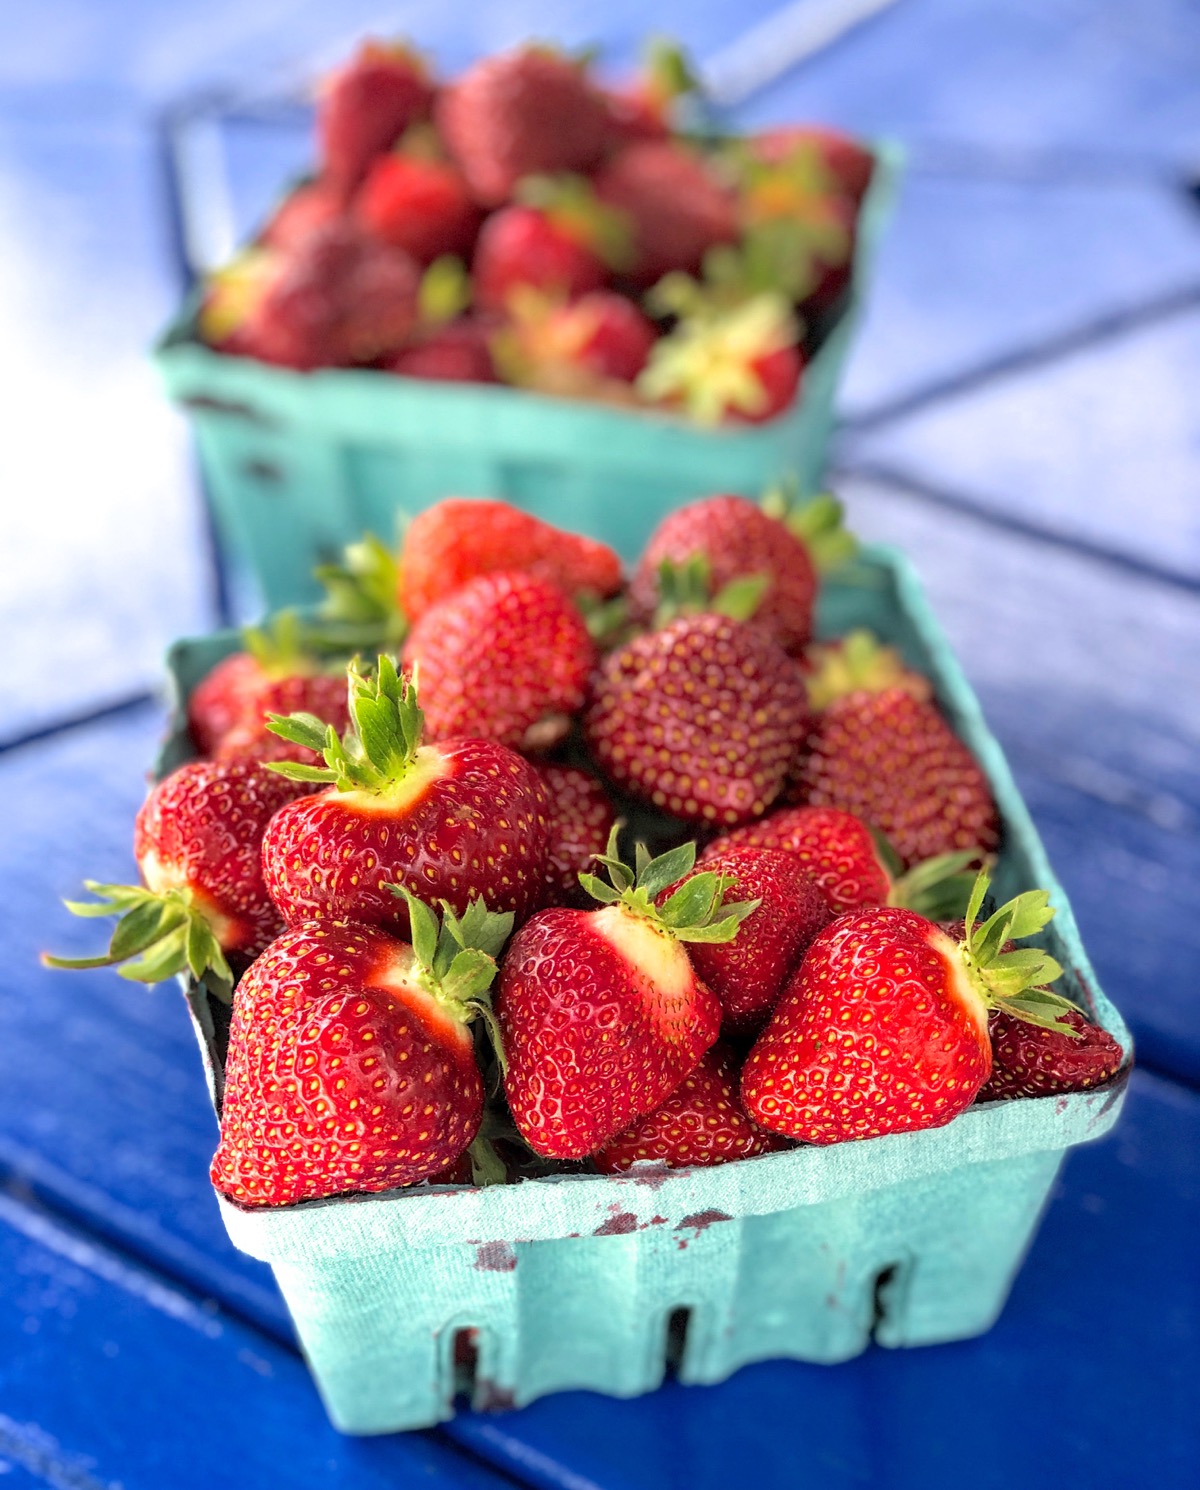 Two quart baskets of fresh-picked strawberries set on a blue table.